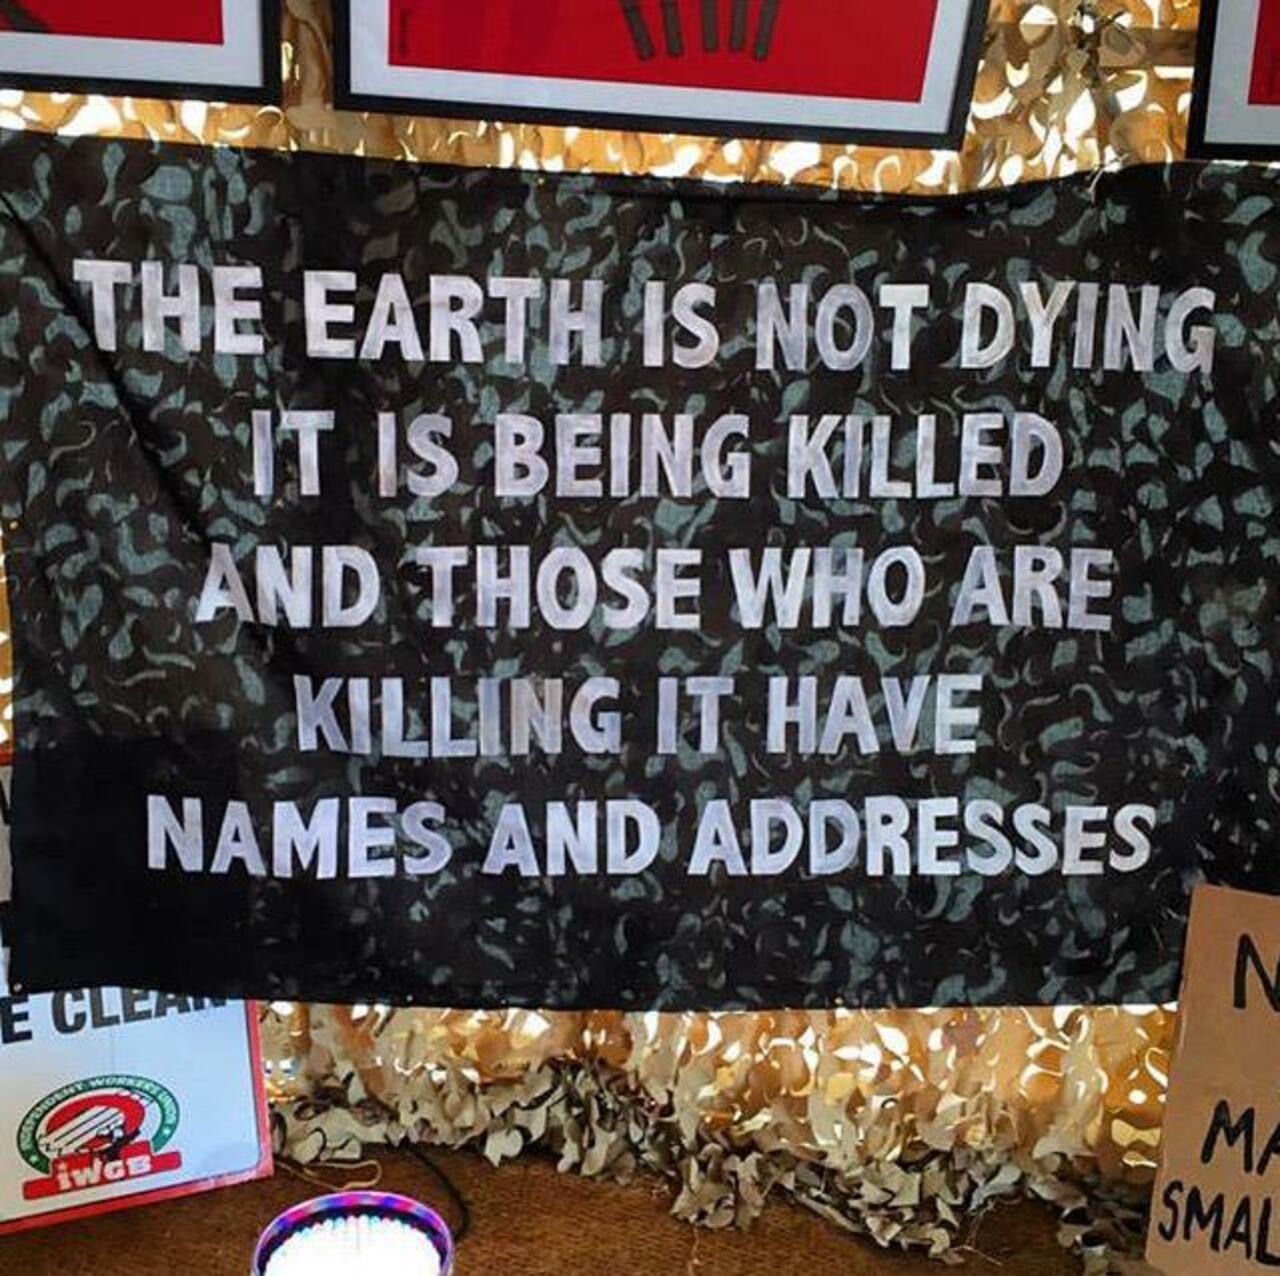 The earth is not dying...
Installation for #Banksy Dismaland 

#streetart #arte #art #graffiti http://t.co/xtodmGYade